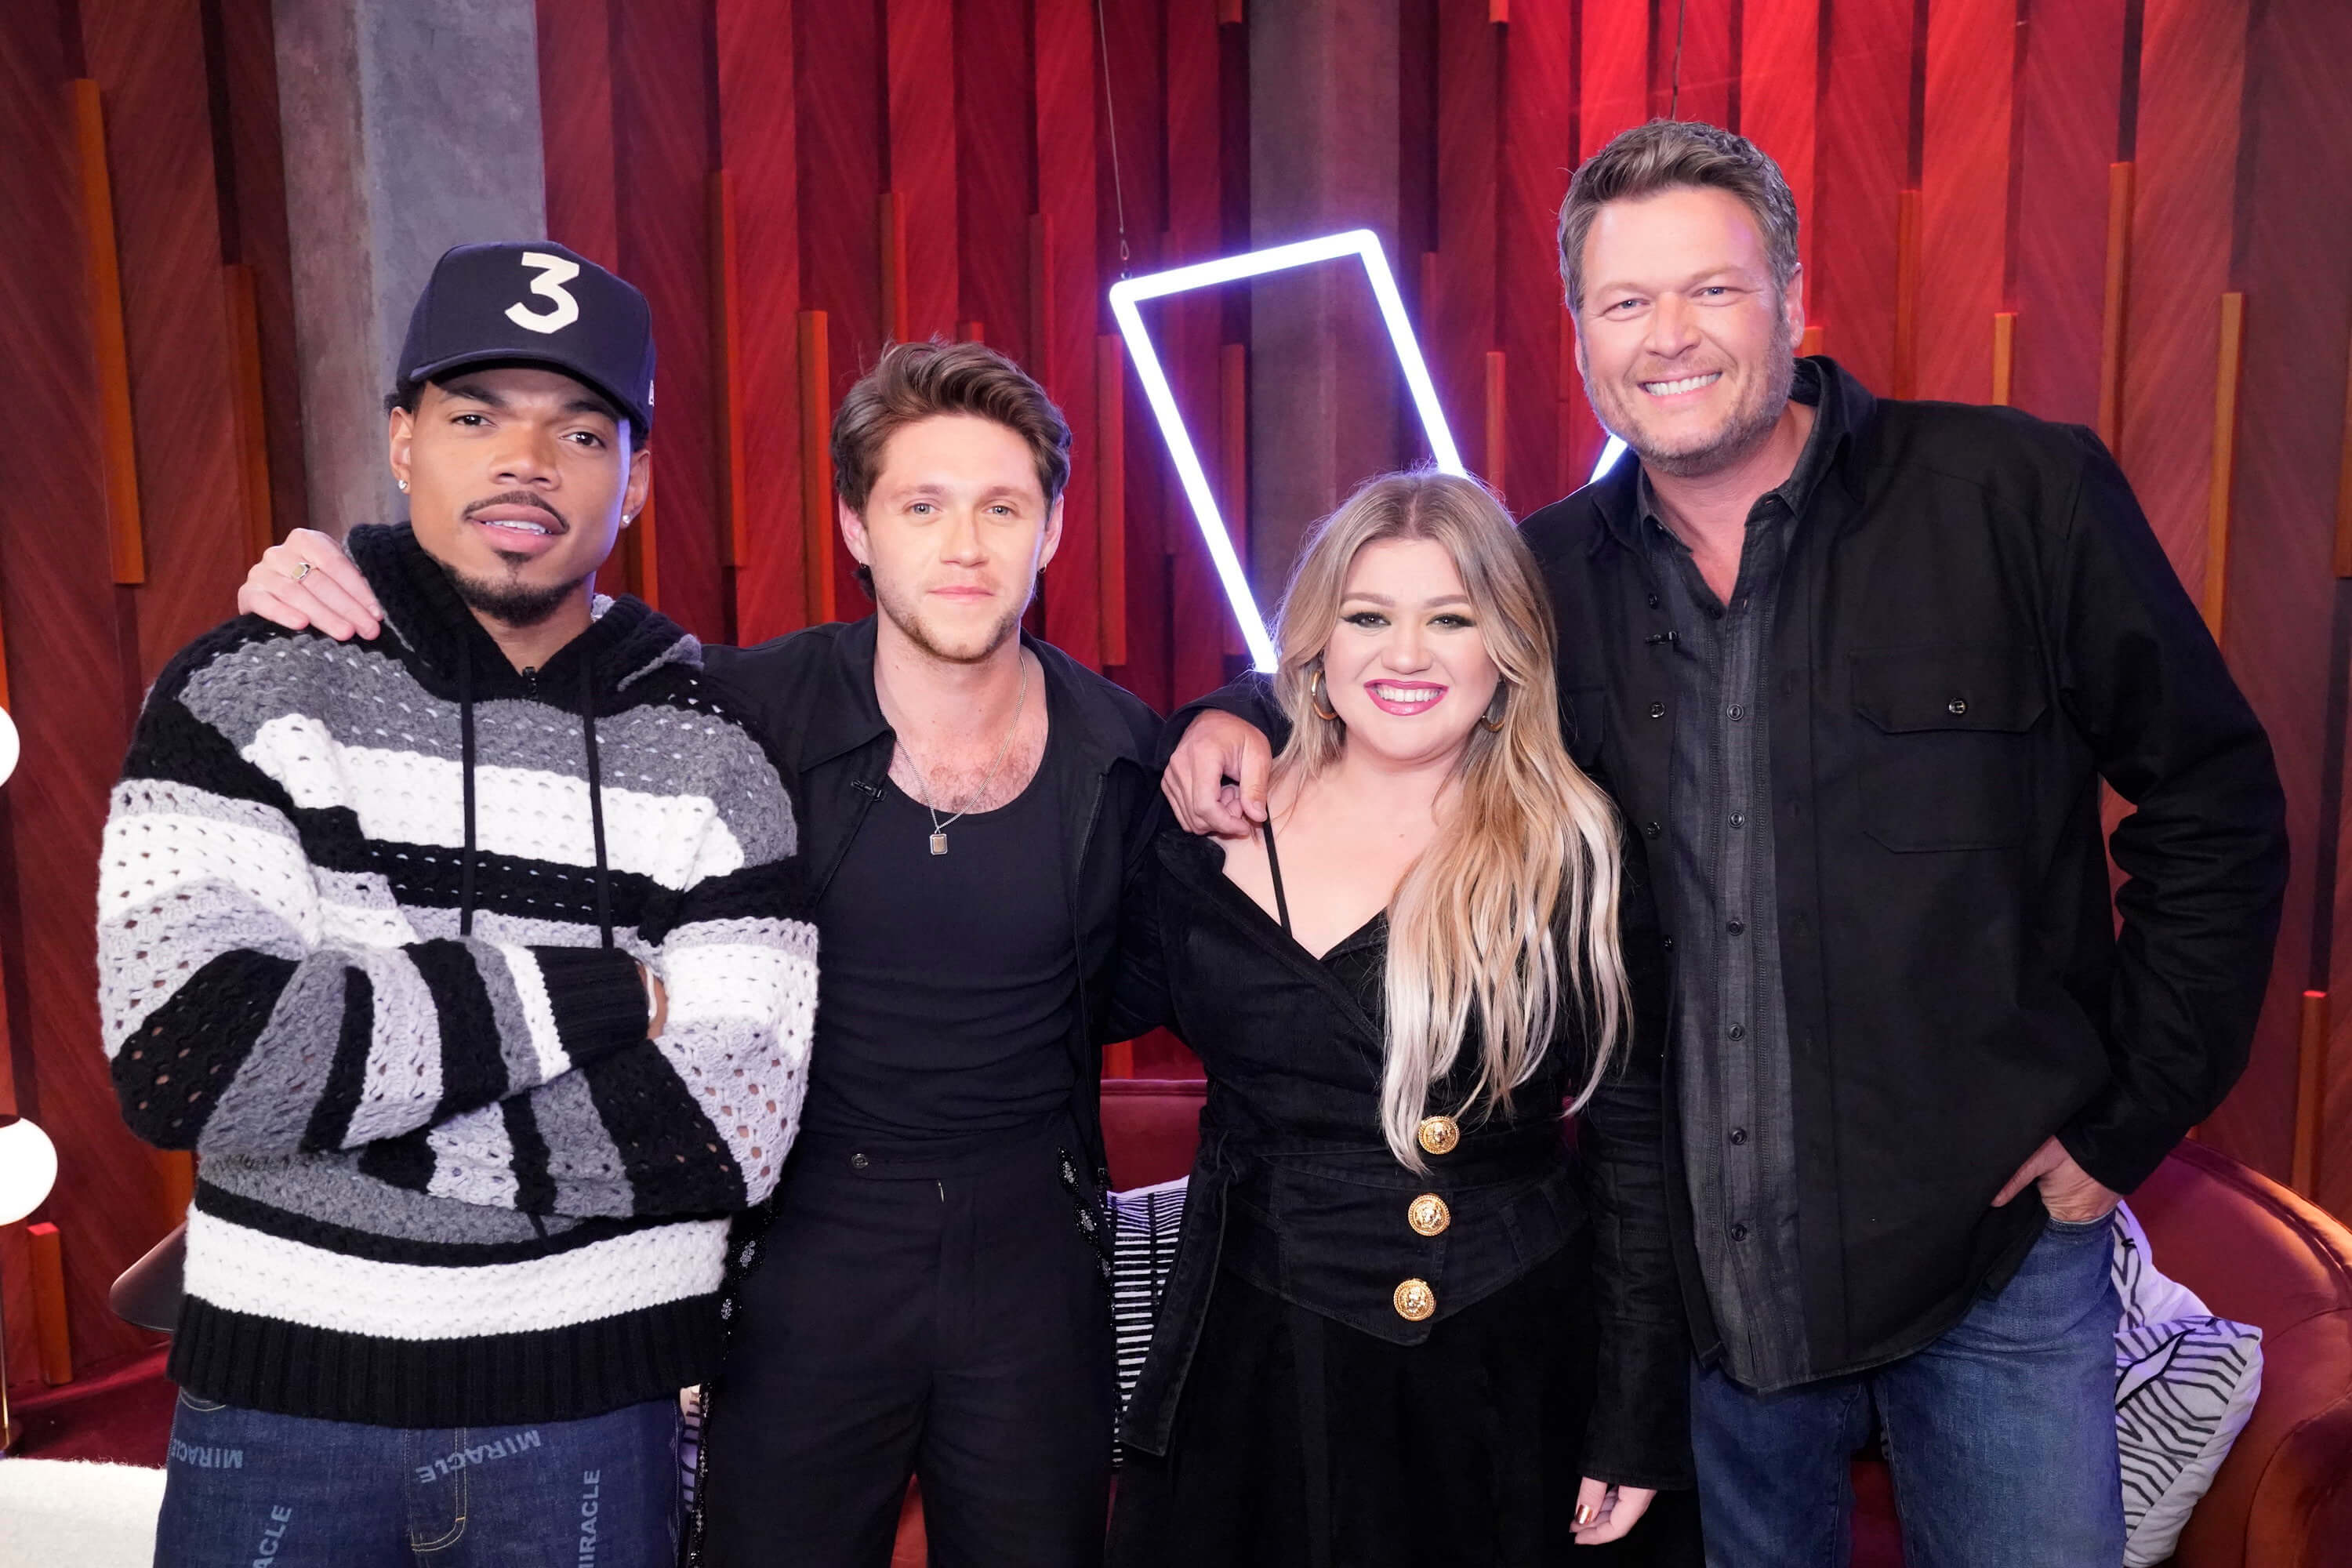 'The Voice' coaches Chance the Rapper, Niall Horan, Kelly Clarkson, and Blake Shelton smile together in front of a red background